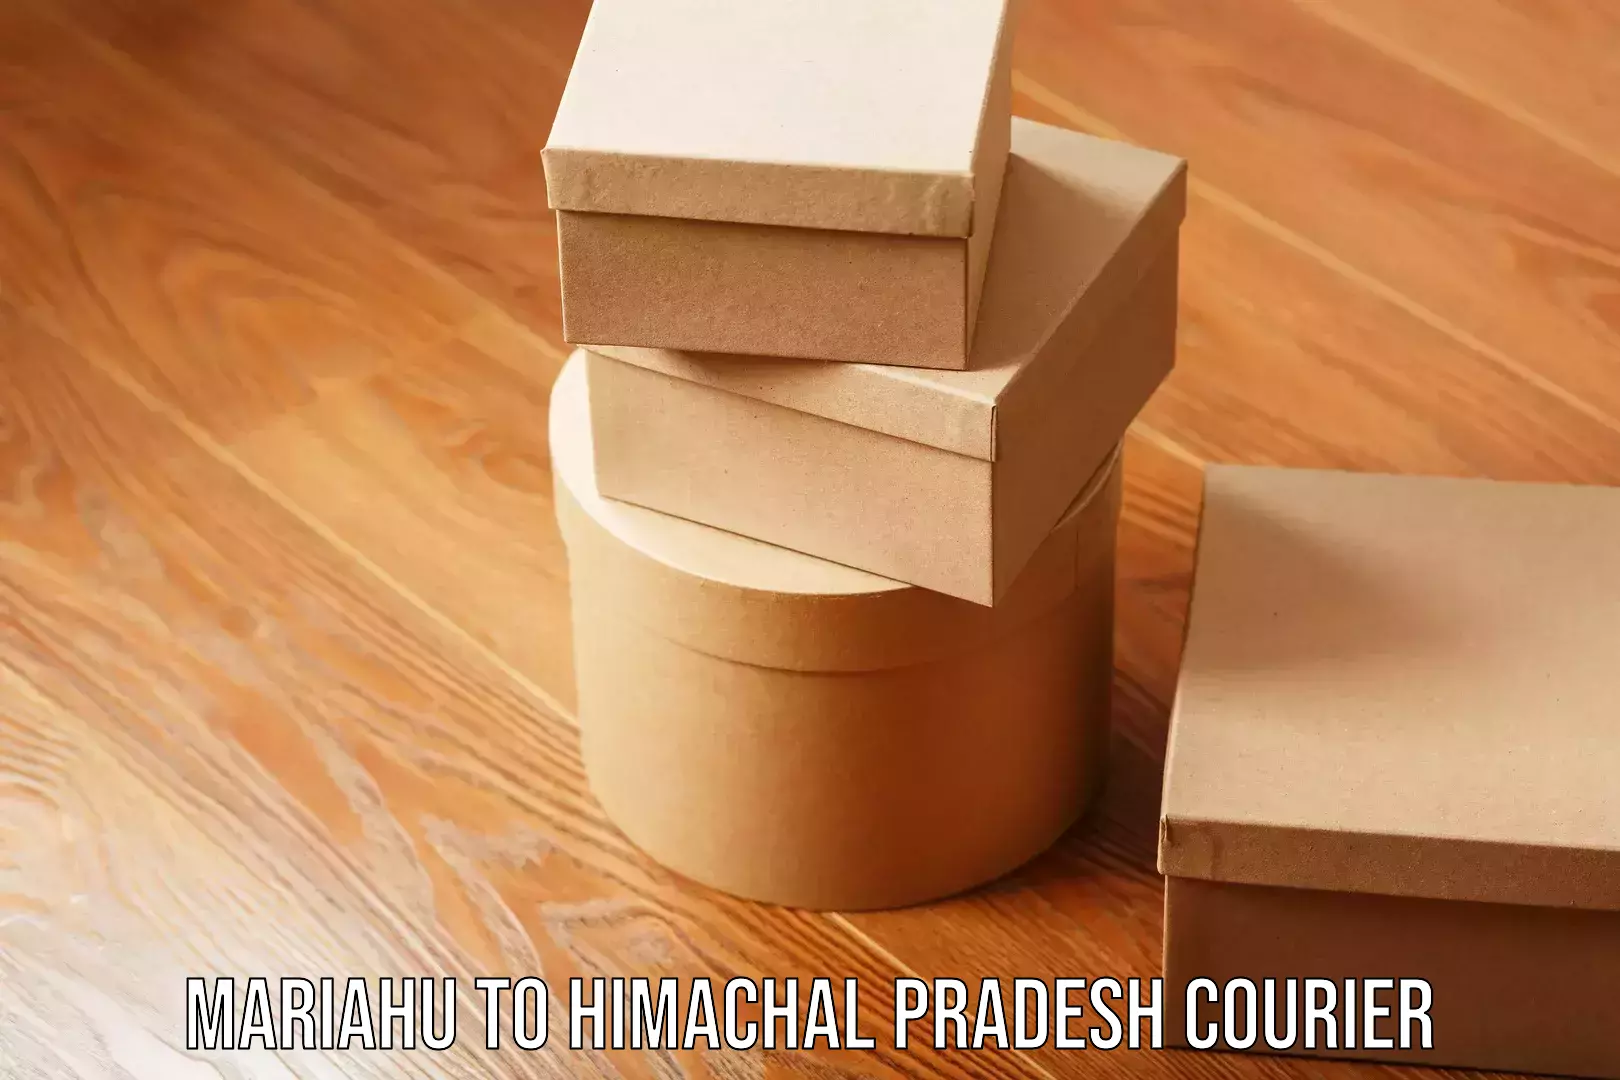 Affordable moving services Mariahu to Himachal Pradesh